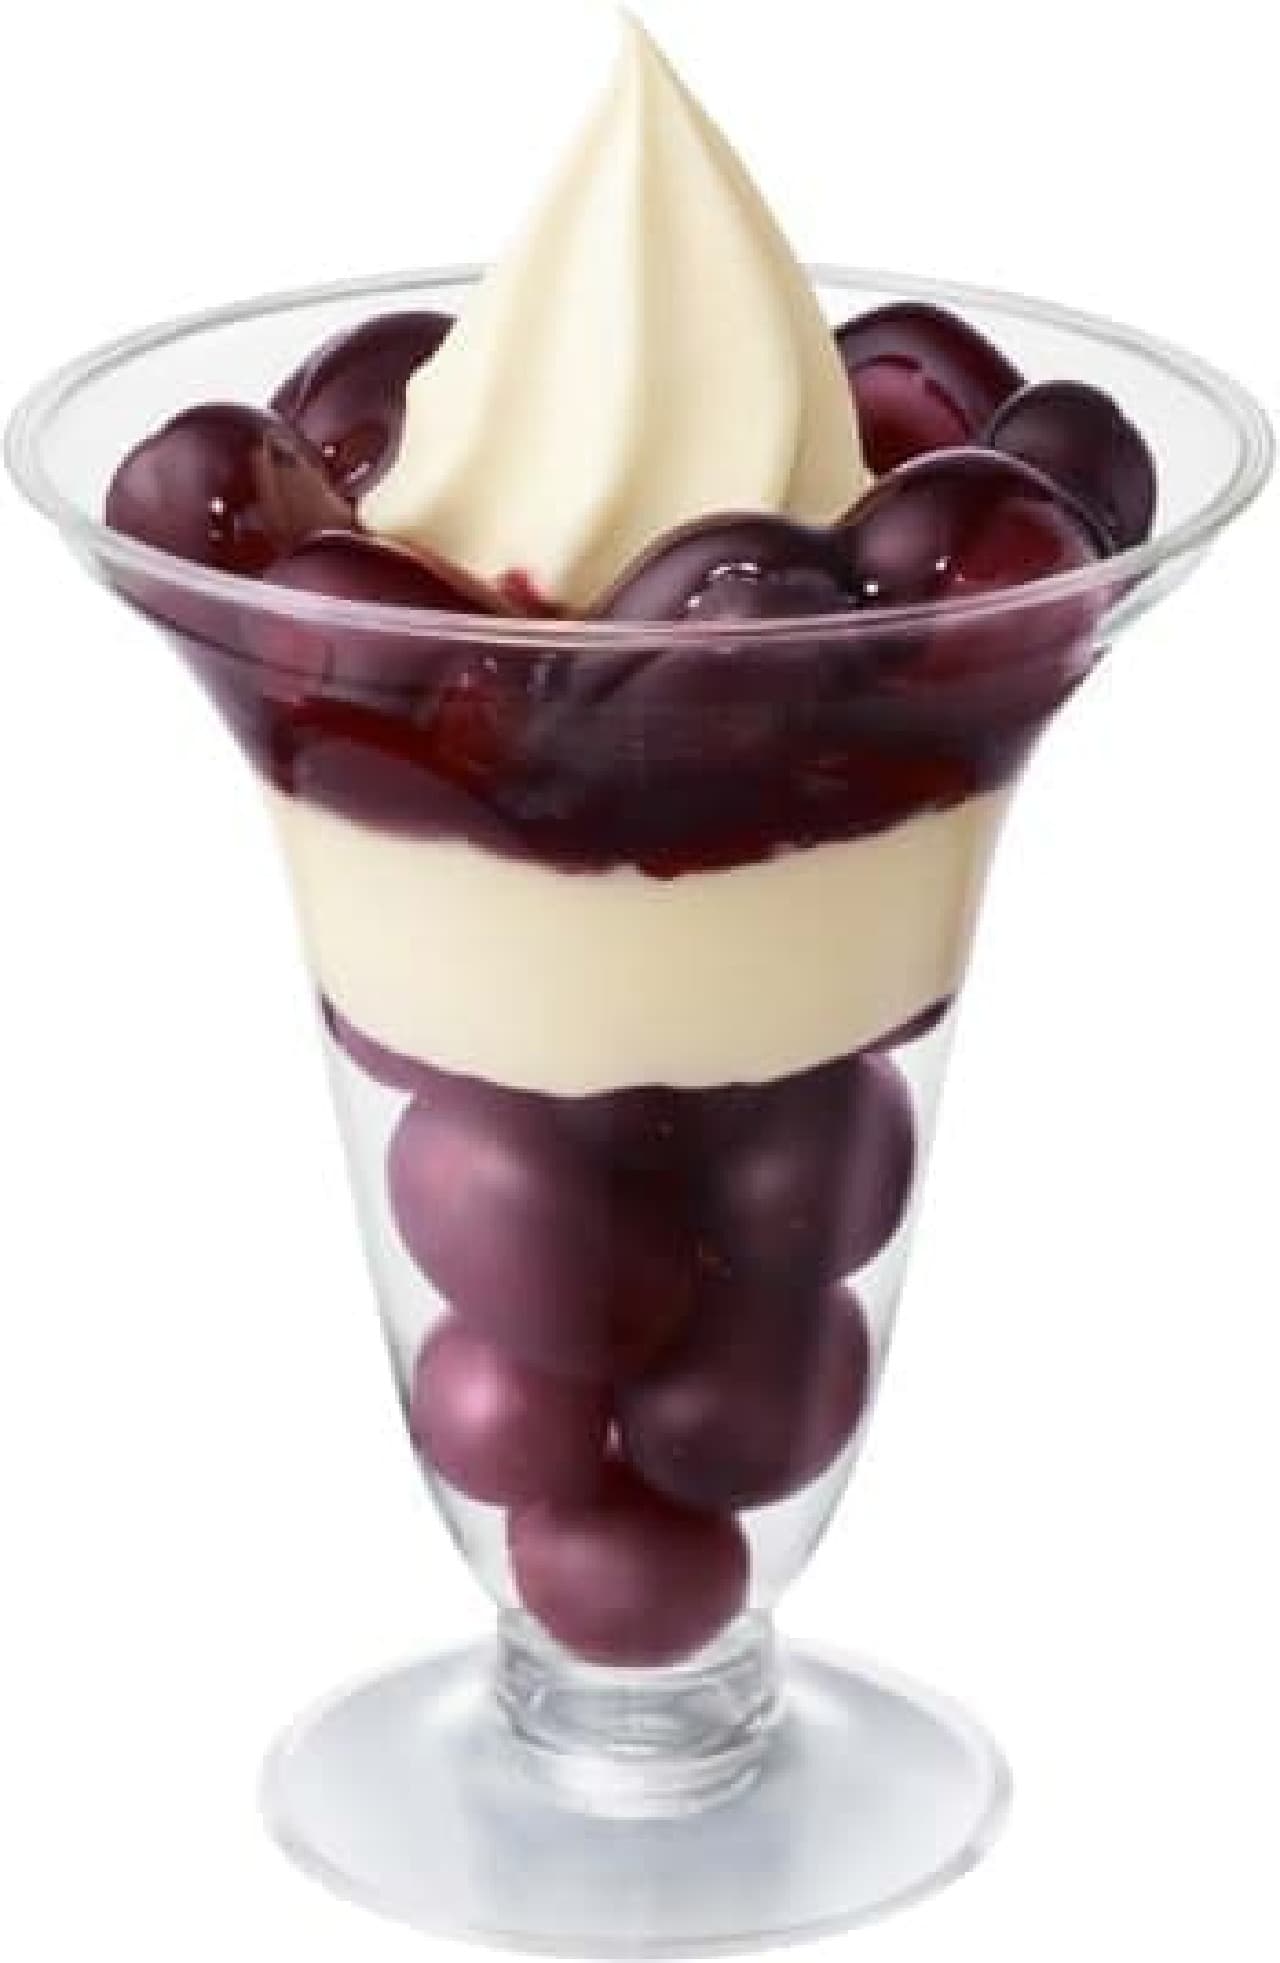 A parfait where you can taste the fresh grapes "whole"!